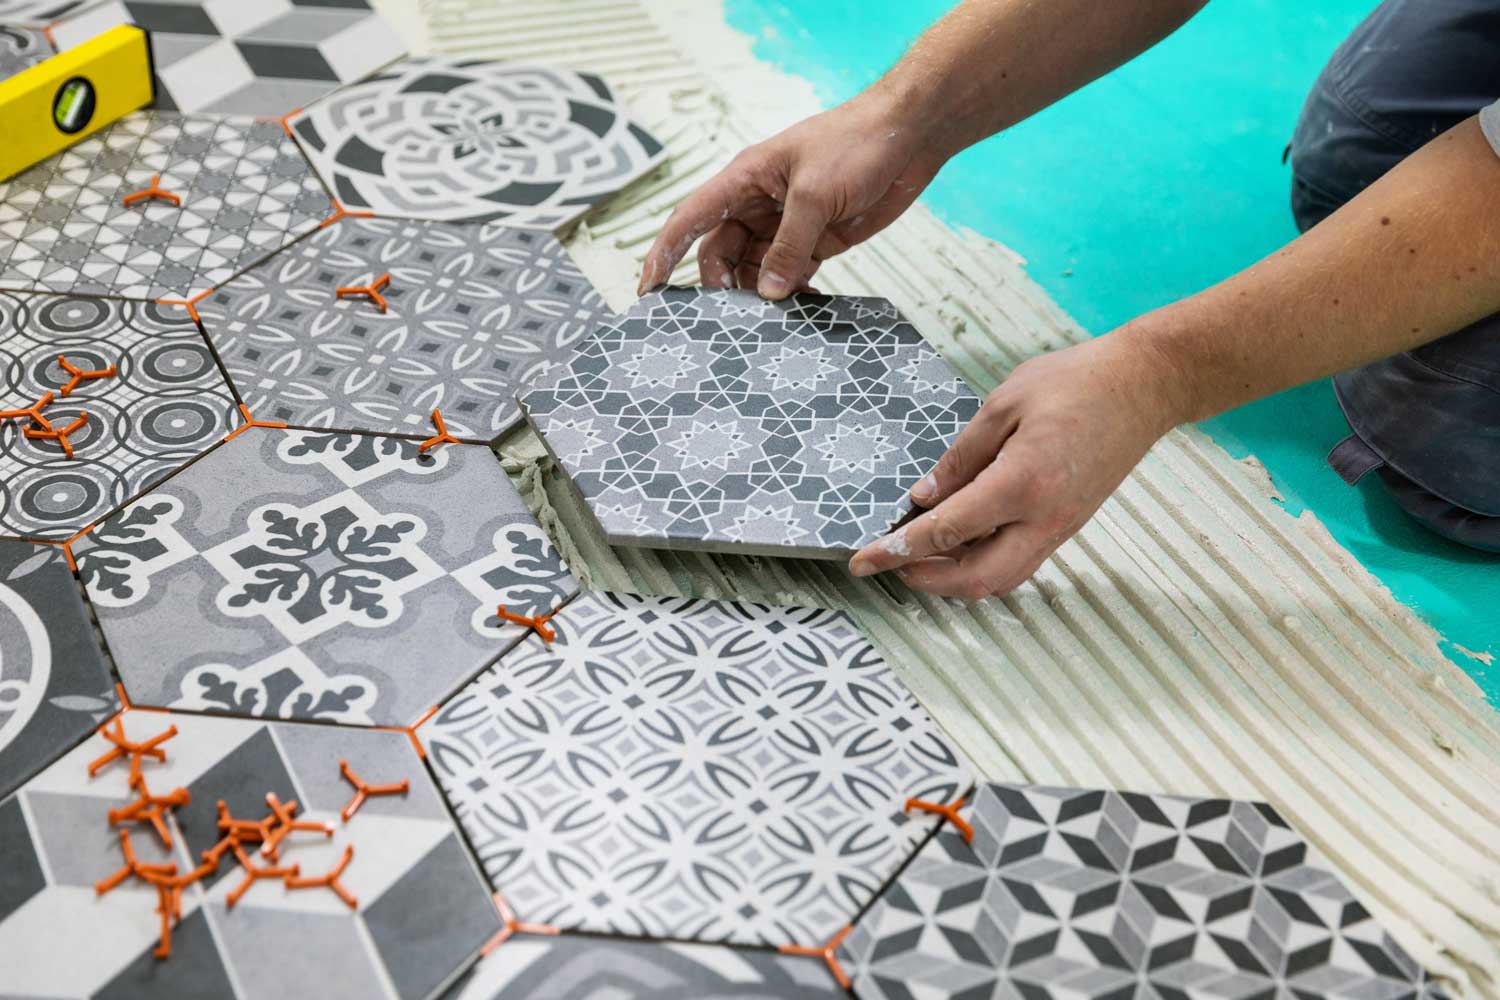 Our tile installation professionals at Footprints Floors will help bring your floors back to life.